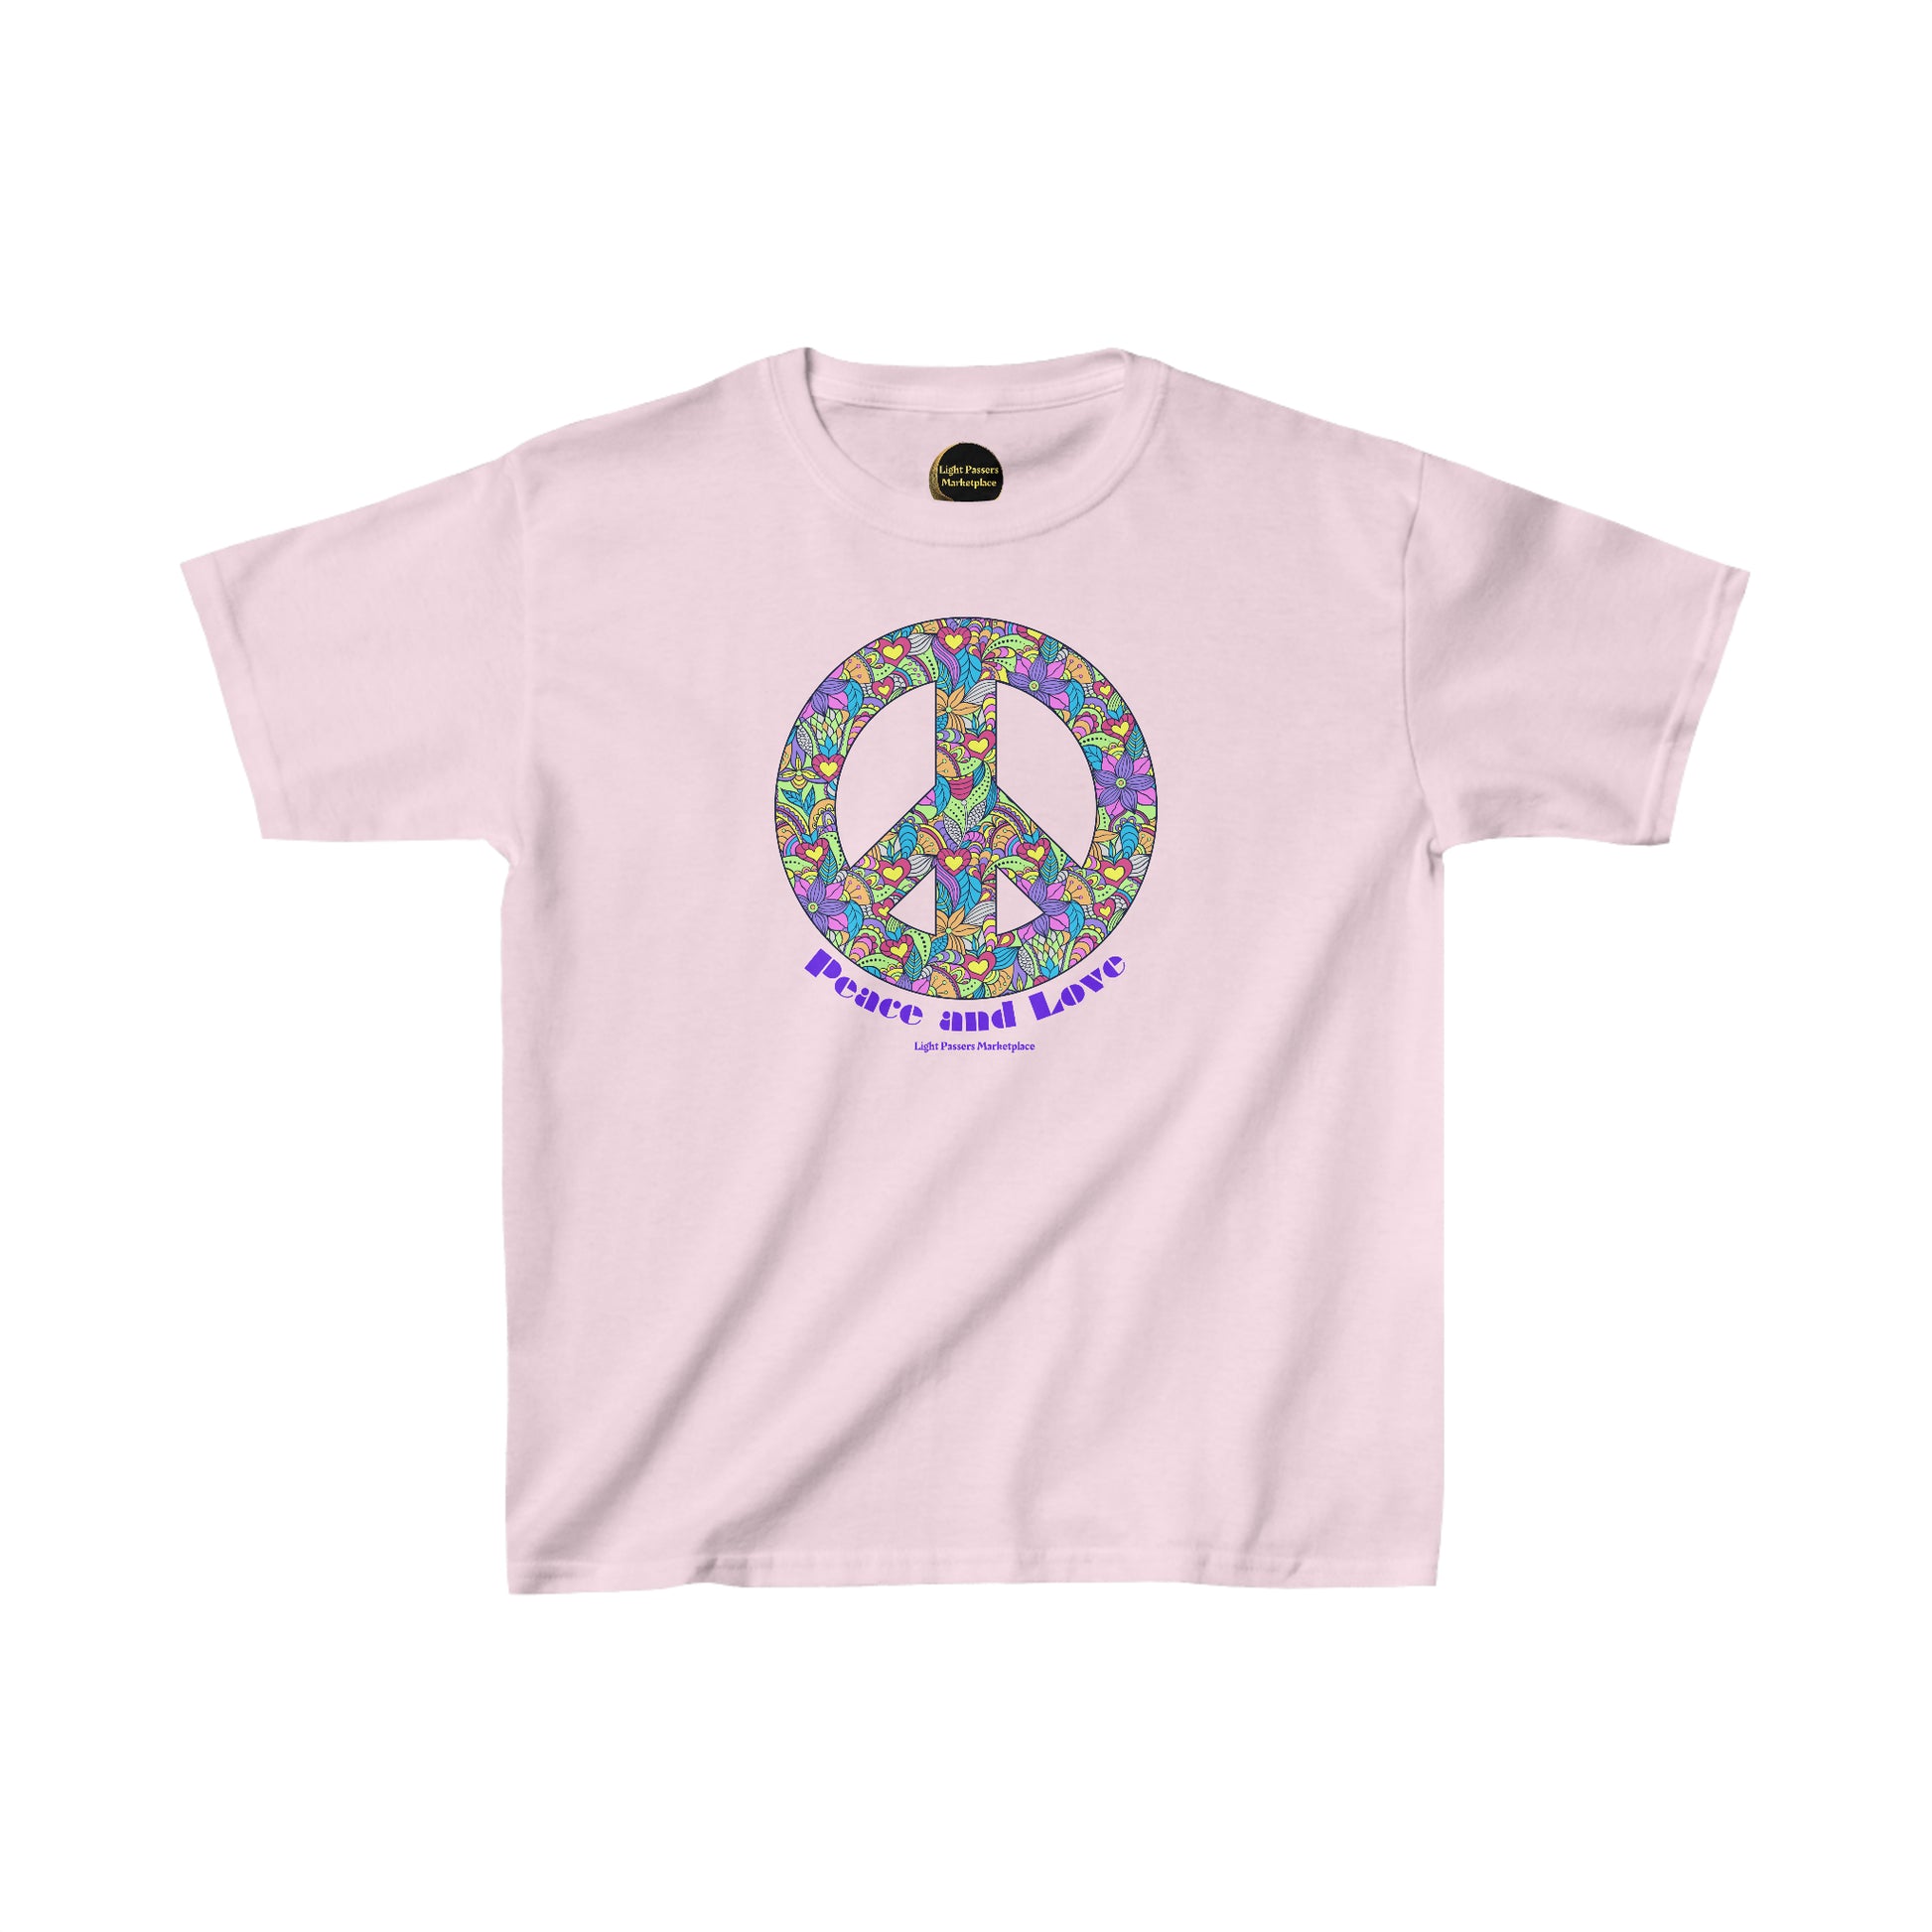 A pink youth t-shirt featuring a peace sign adorned with flowers and hearts. Made of 100% cotton, with twill tape shoulders for durability and curl-resistant collar. Ethically sourced US cotton.